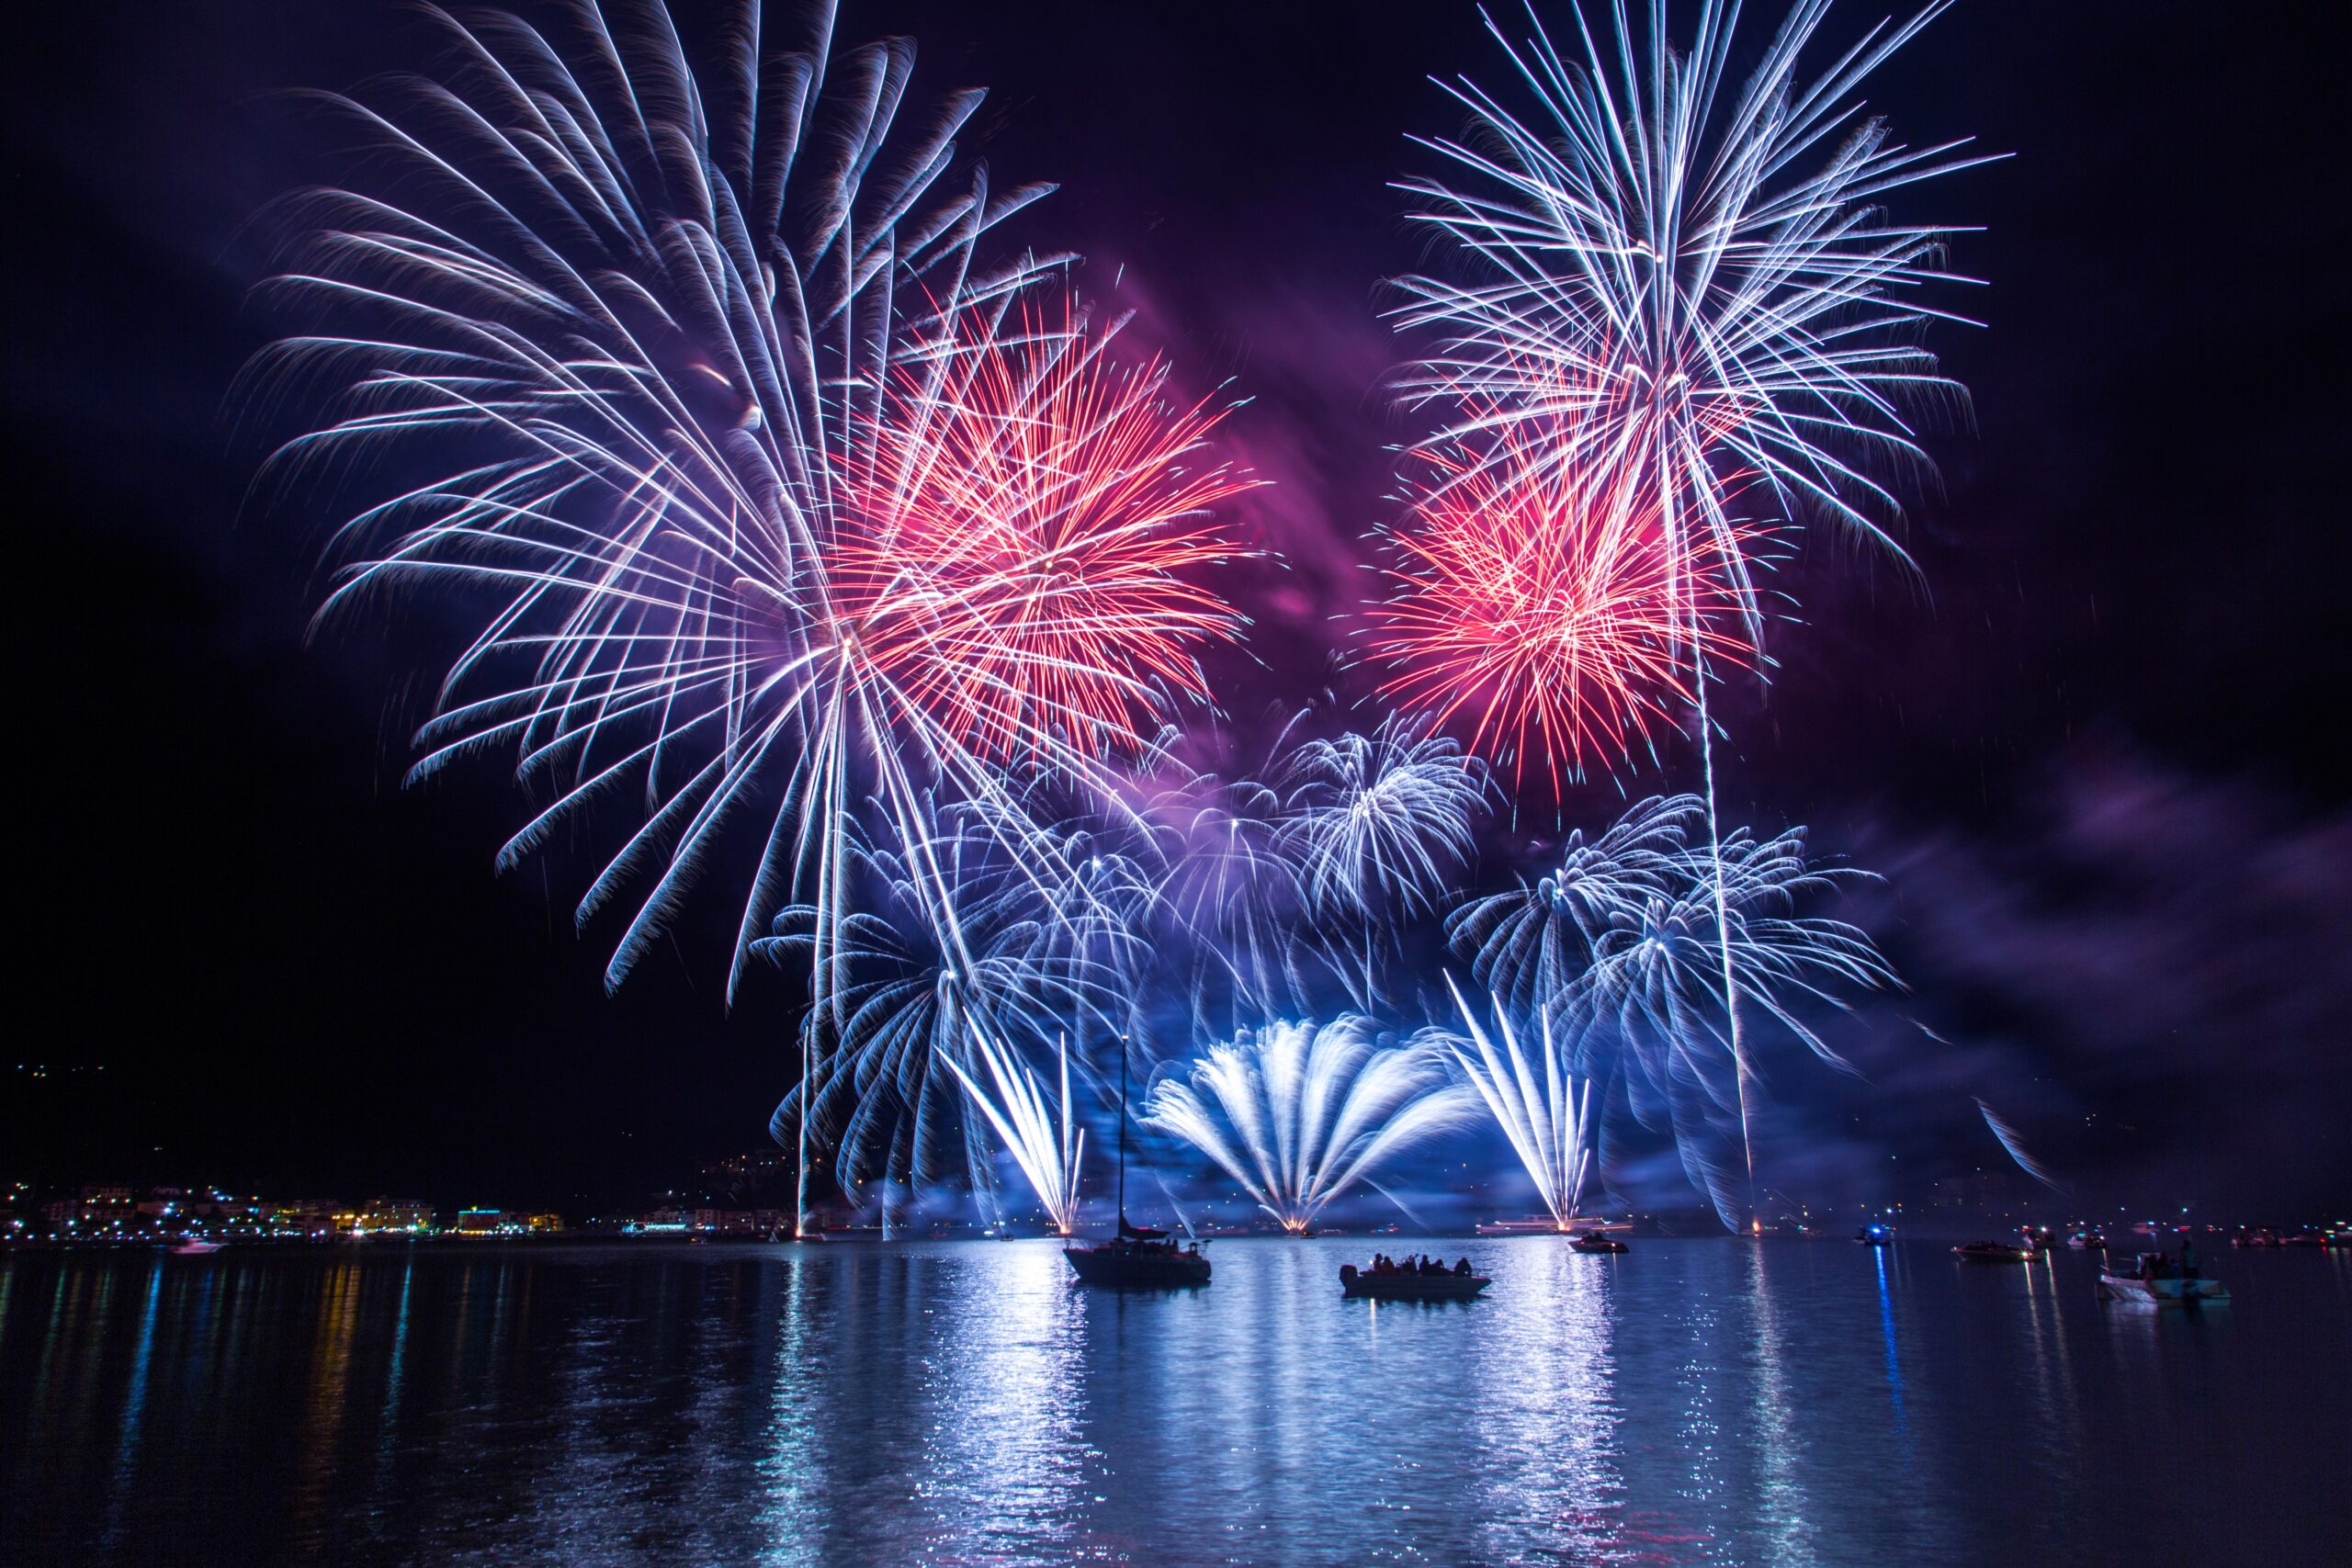 Viewing Maryland’s Chesapeake Bay Independence Day Fireworks by boat and night boating tips